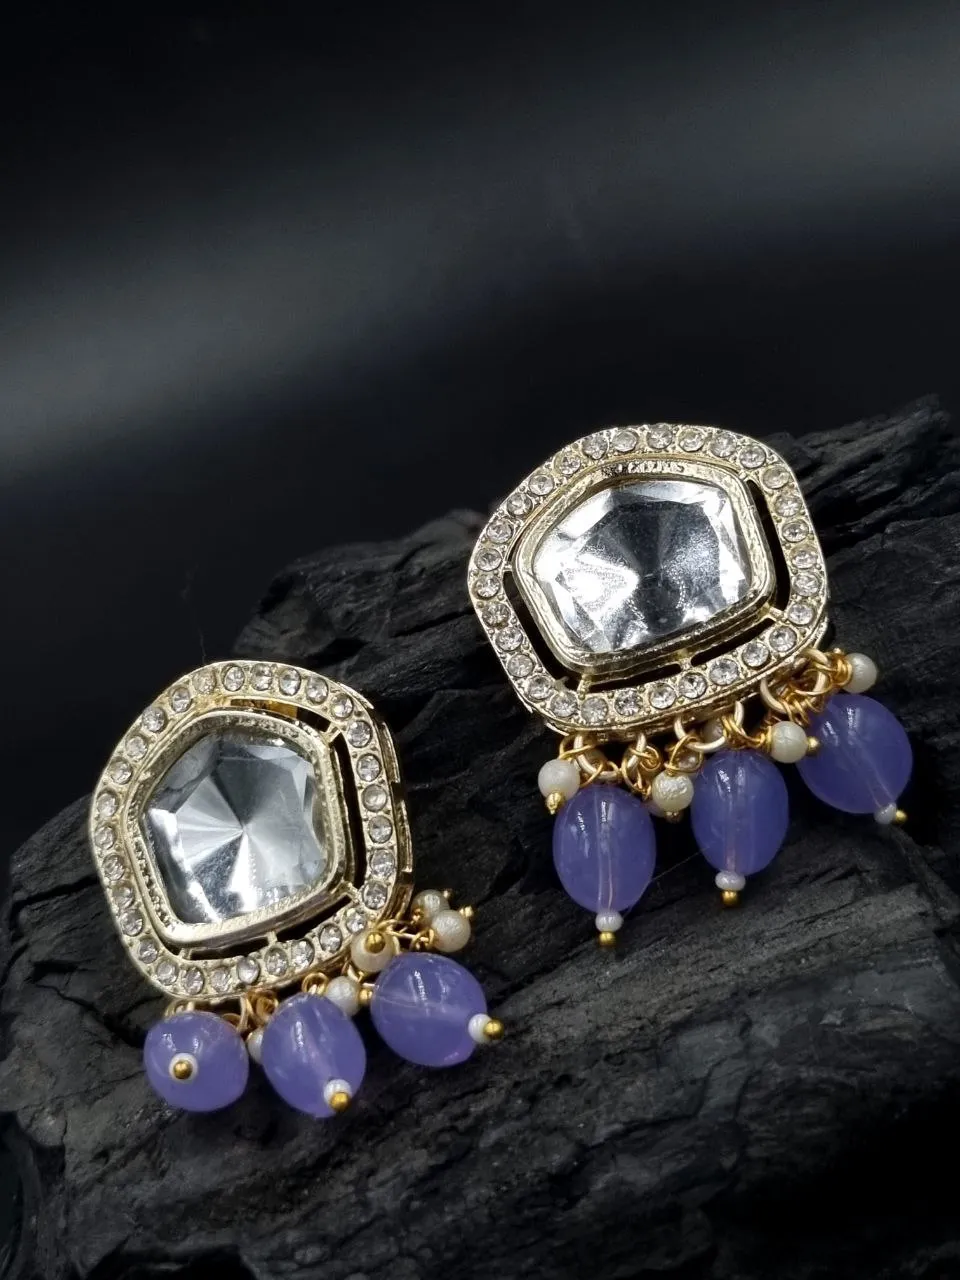 Sapphire Studs Earrings in Ludhiana  Dealers Manufacturers  Suppliers   Justdial